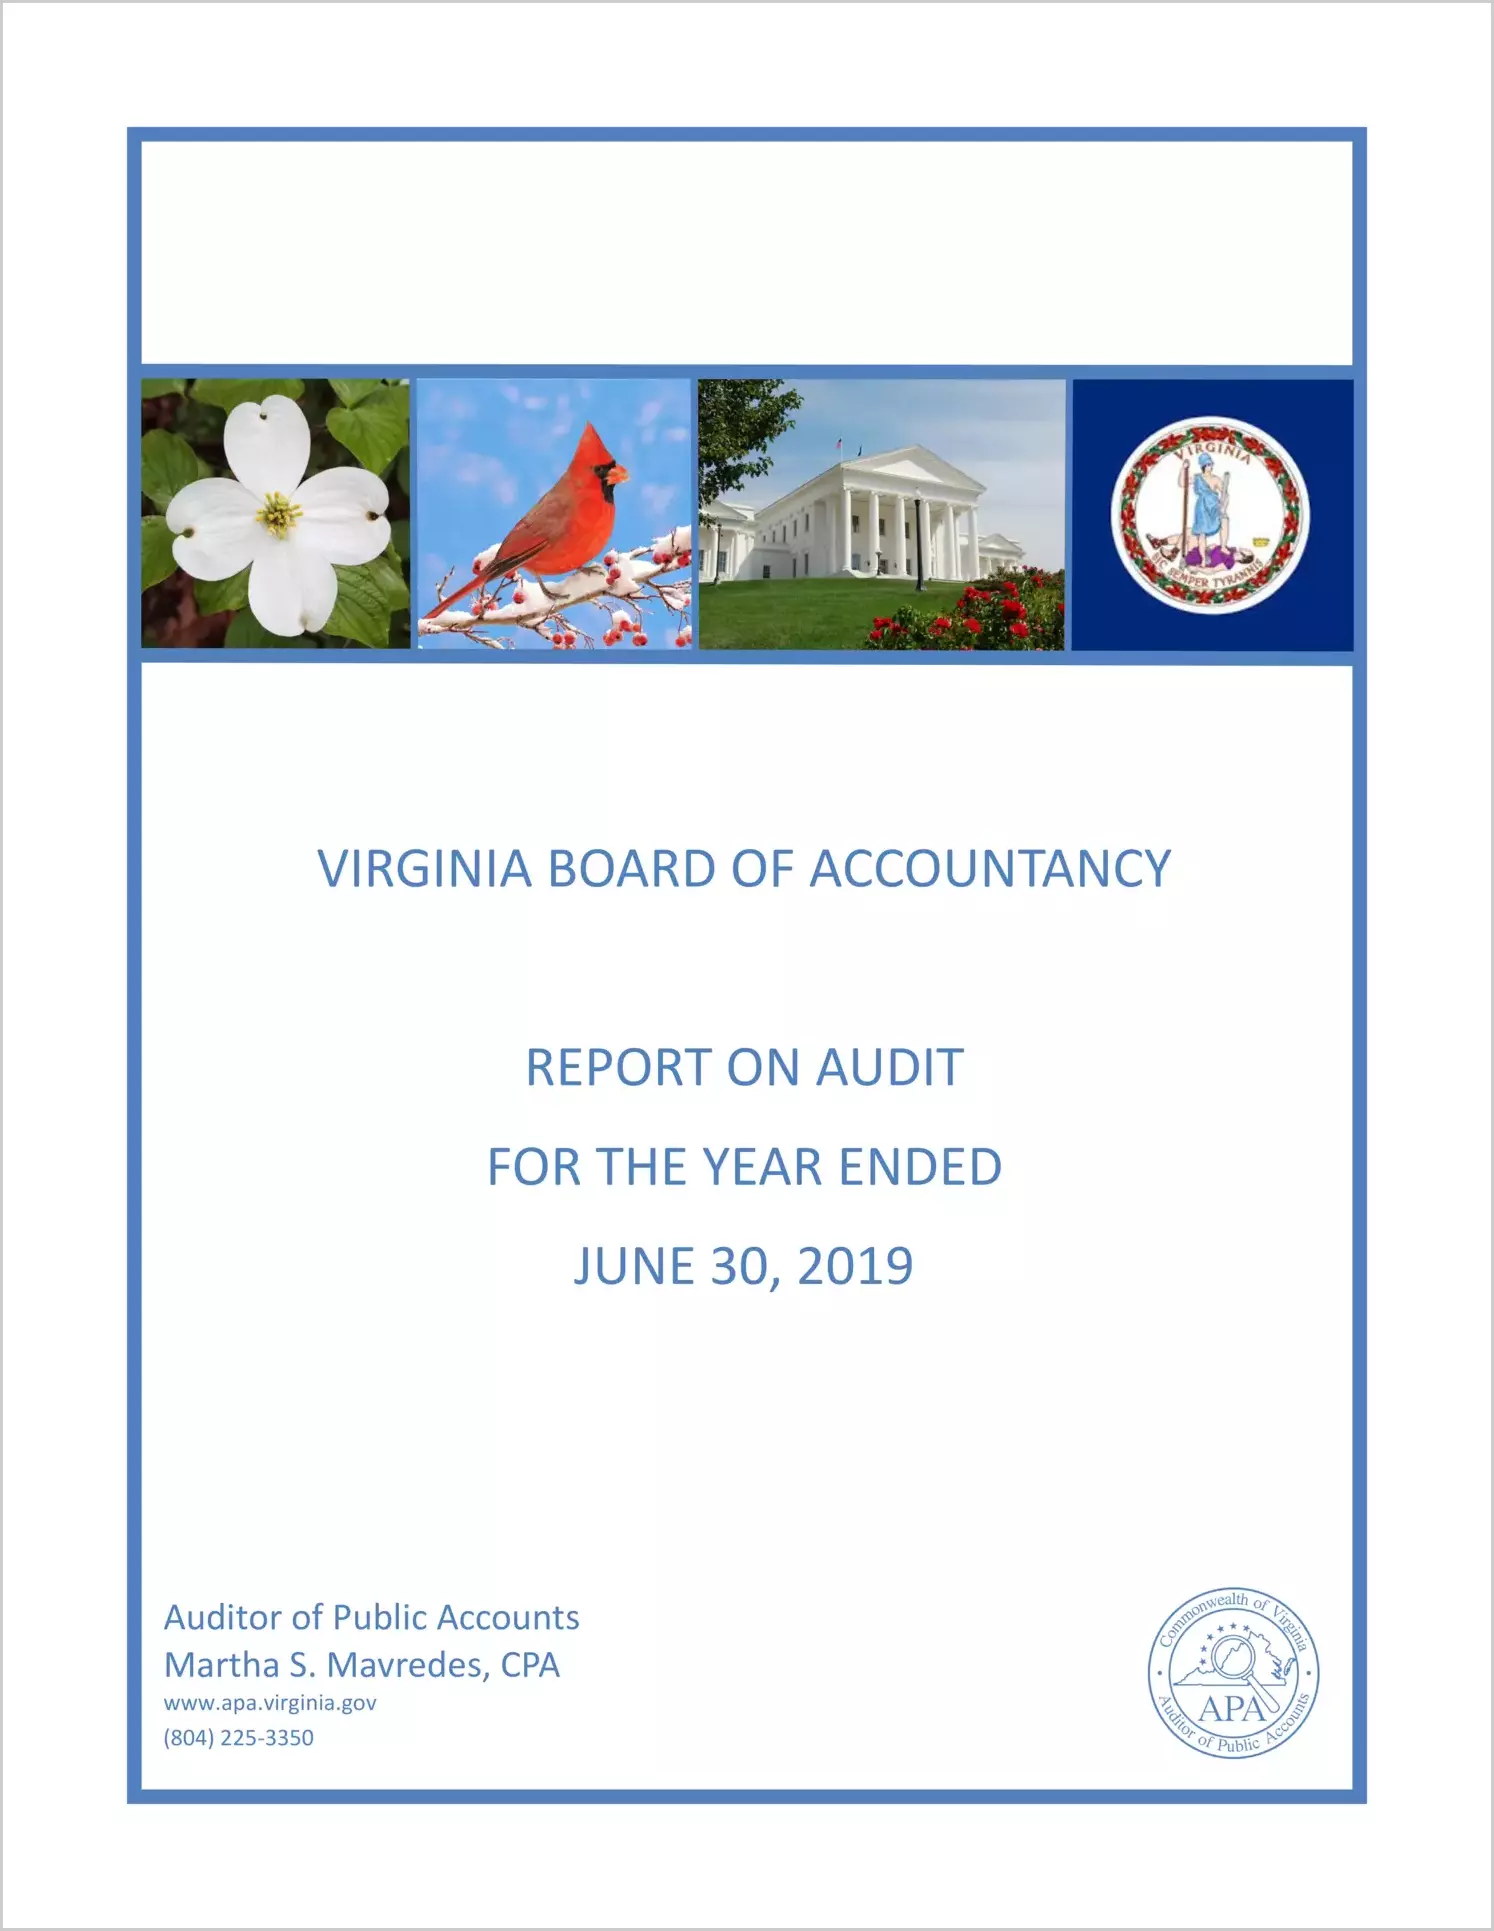 Virginia Board of Accountancy for the year ended June 30, 2019